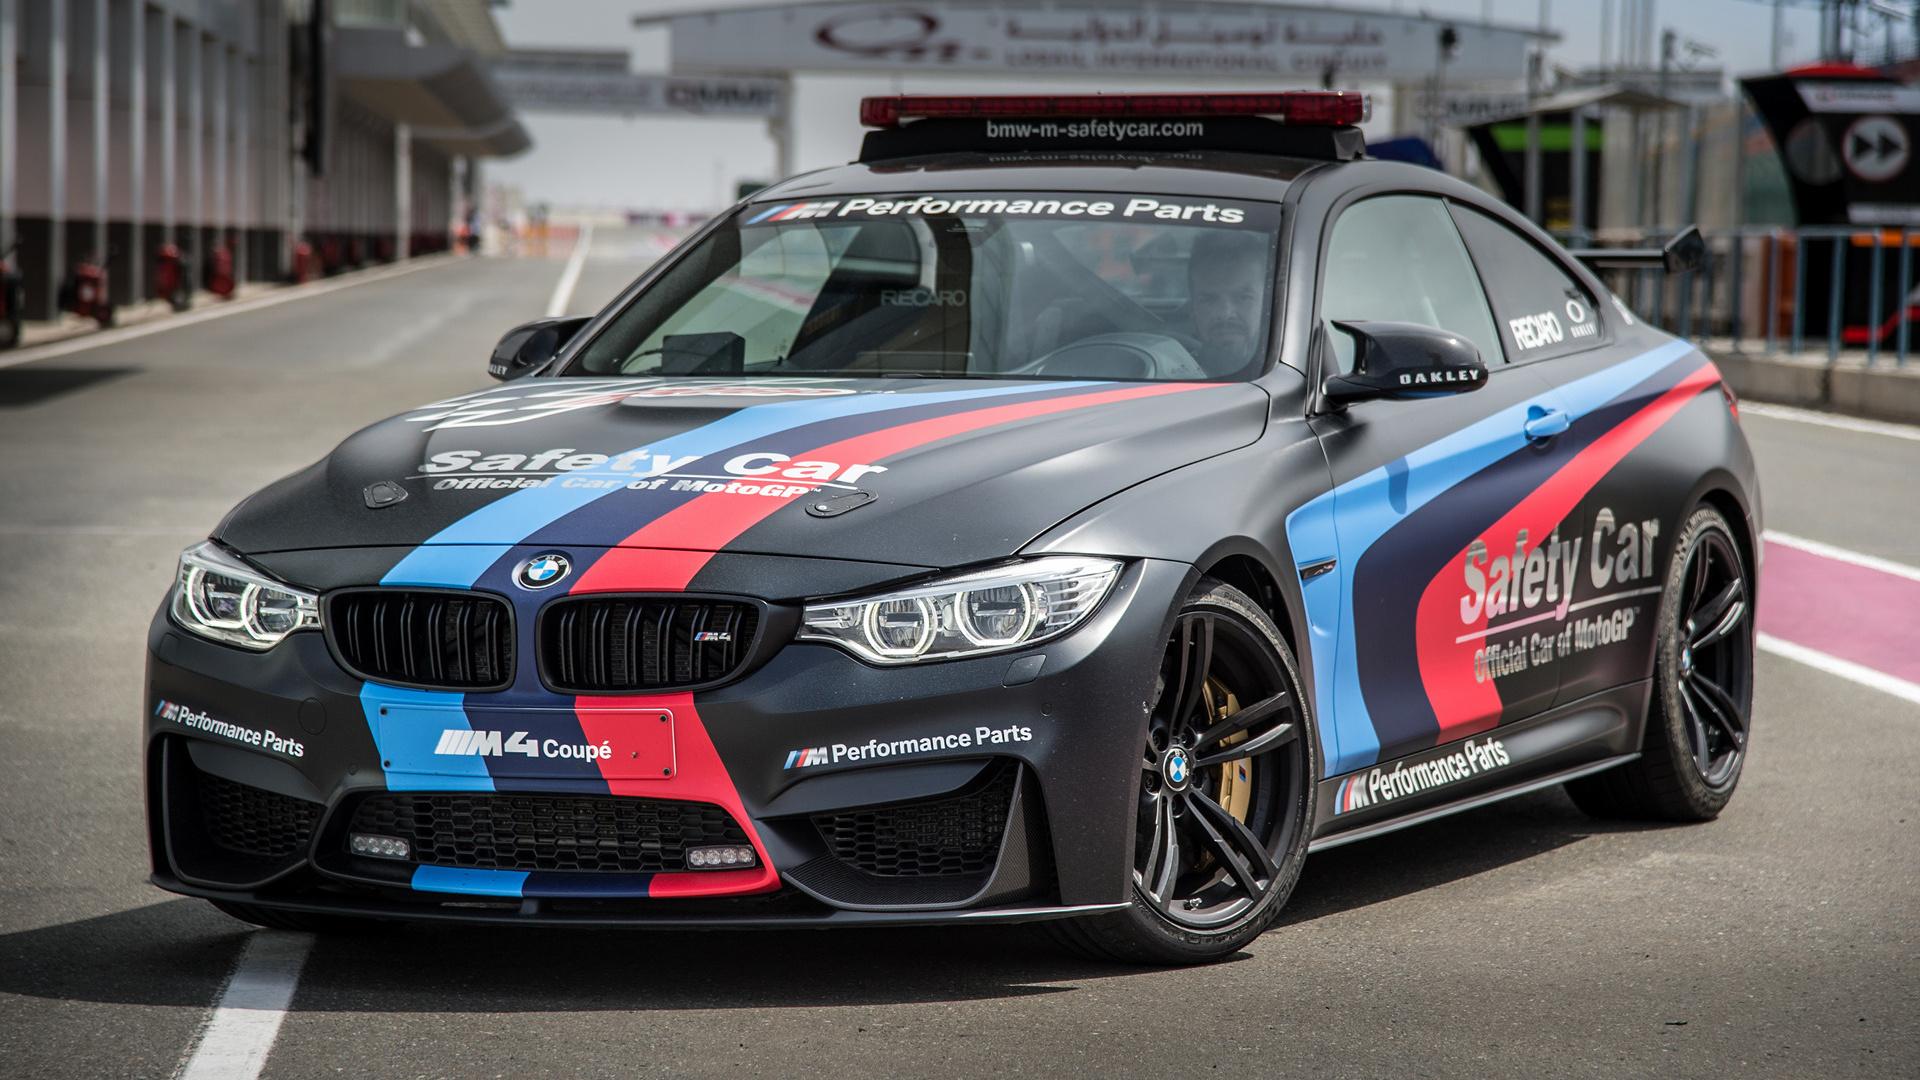 BMW M4 Coupe MotoGP Safety Car and HD Image. Car